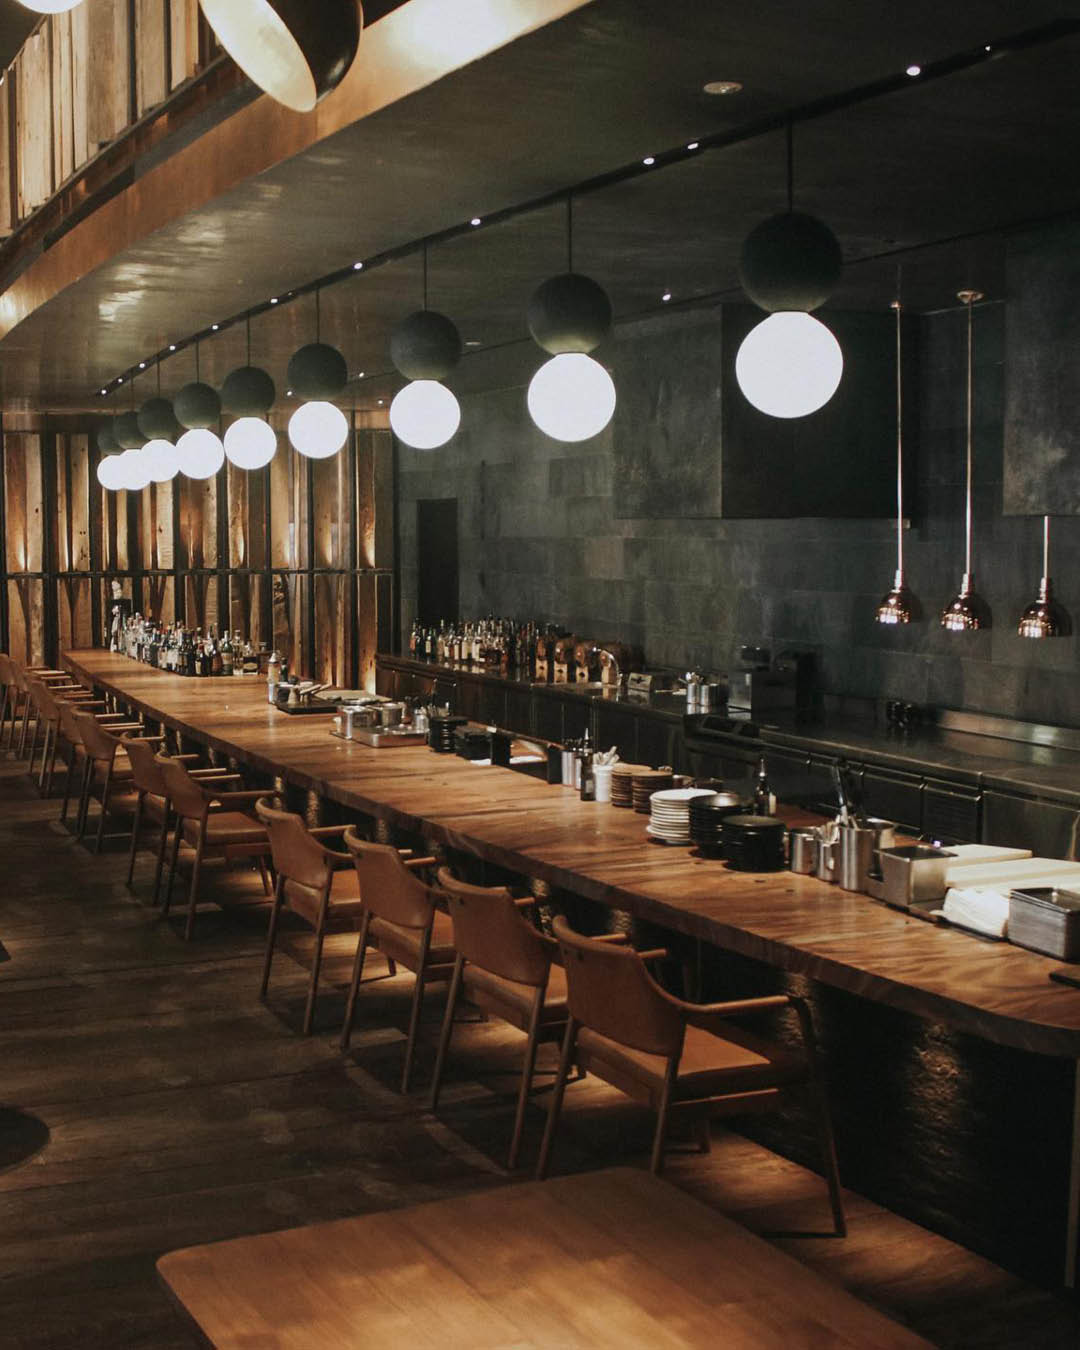 A long table at Burnt Ends restaurant, Singapore.